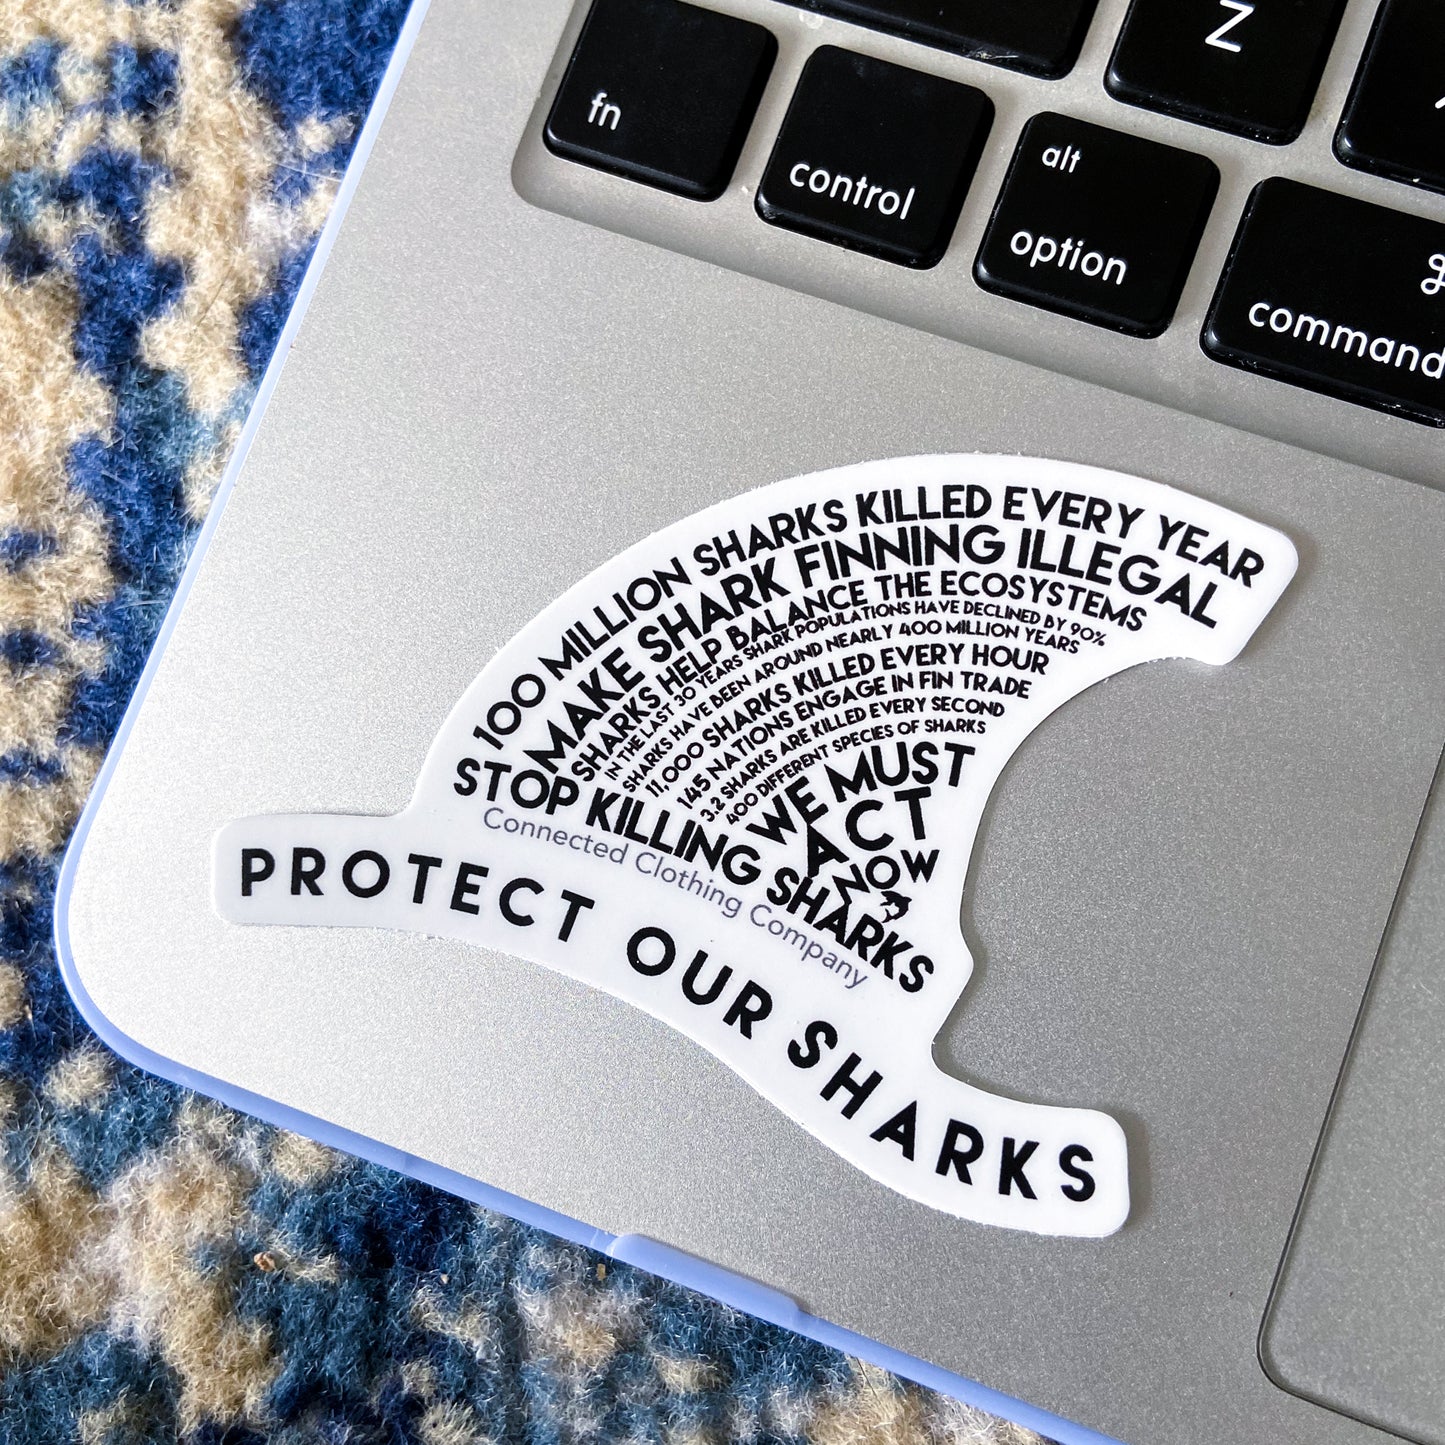 Connected Clothing Company Protect Our Sharks Sticker on Macbook for size reference.